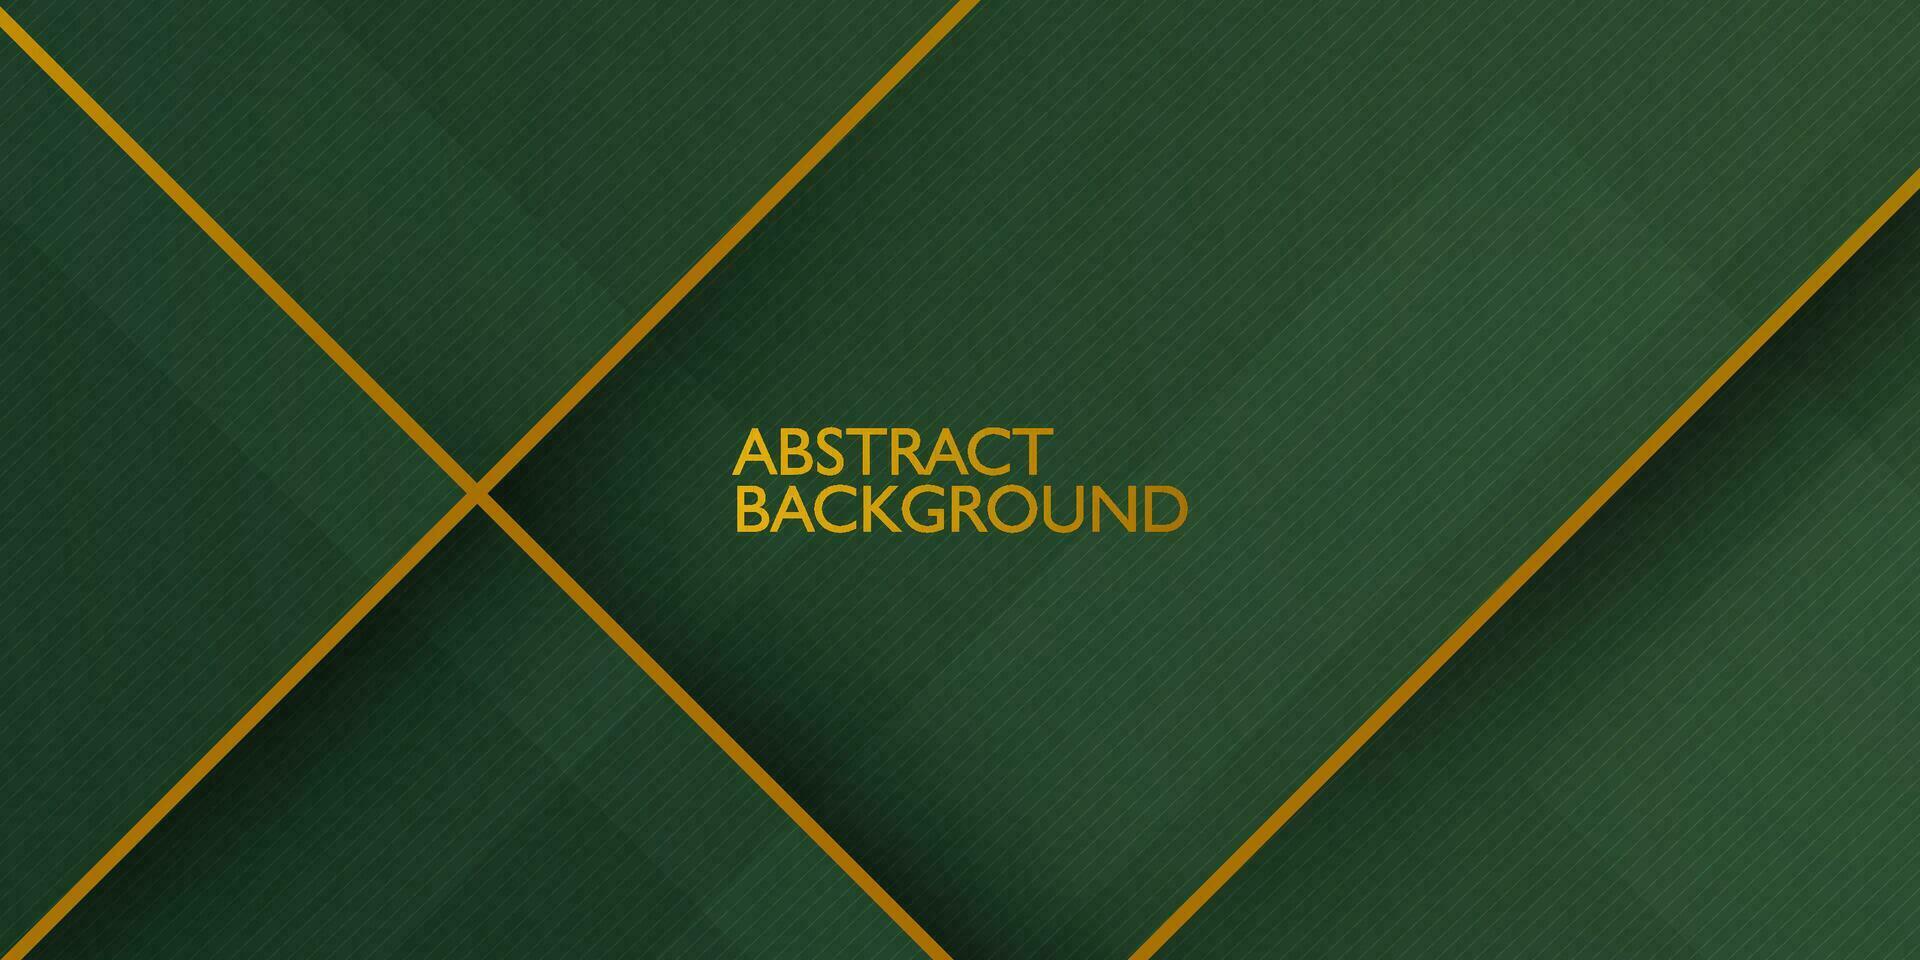 Abstract dark green gradient background with shadow and gold lines. Abstract simple background for banner, brochure, presentation design, and business card. Eps10 vector